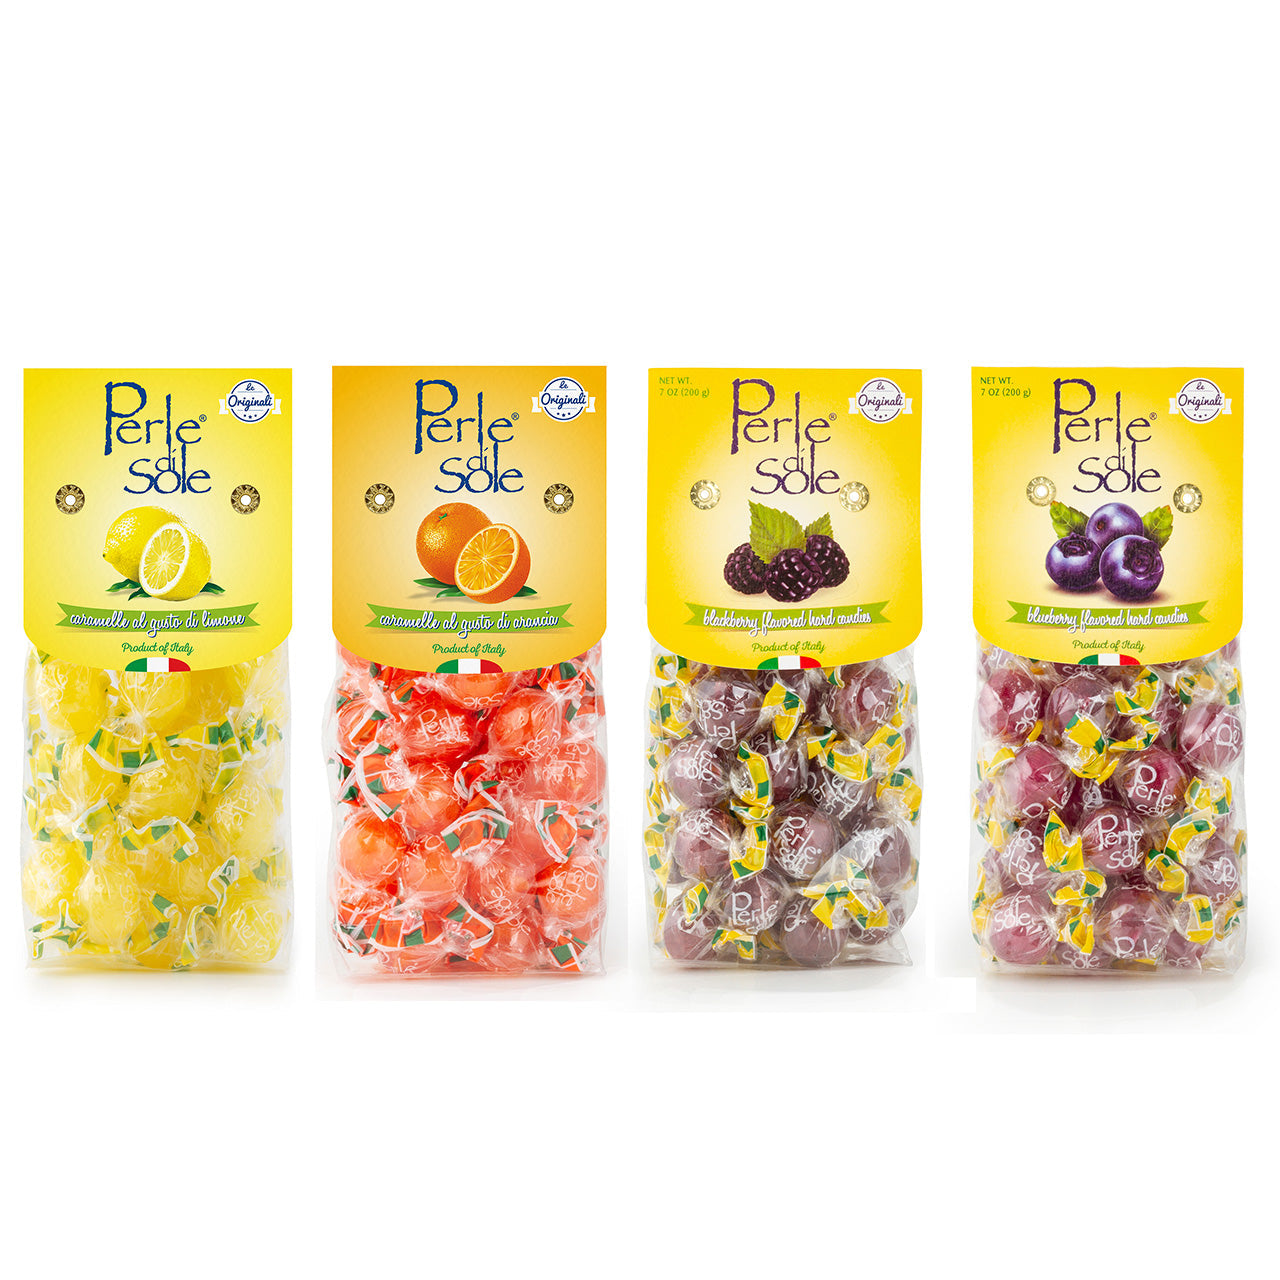 4 Flavors Assorted Hard Candies with a Tart Fizzy Filling